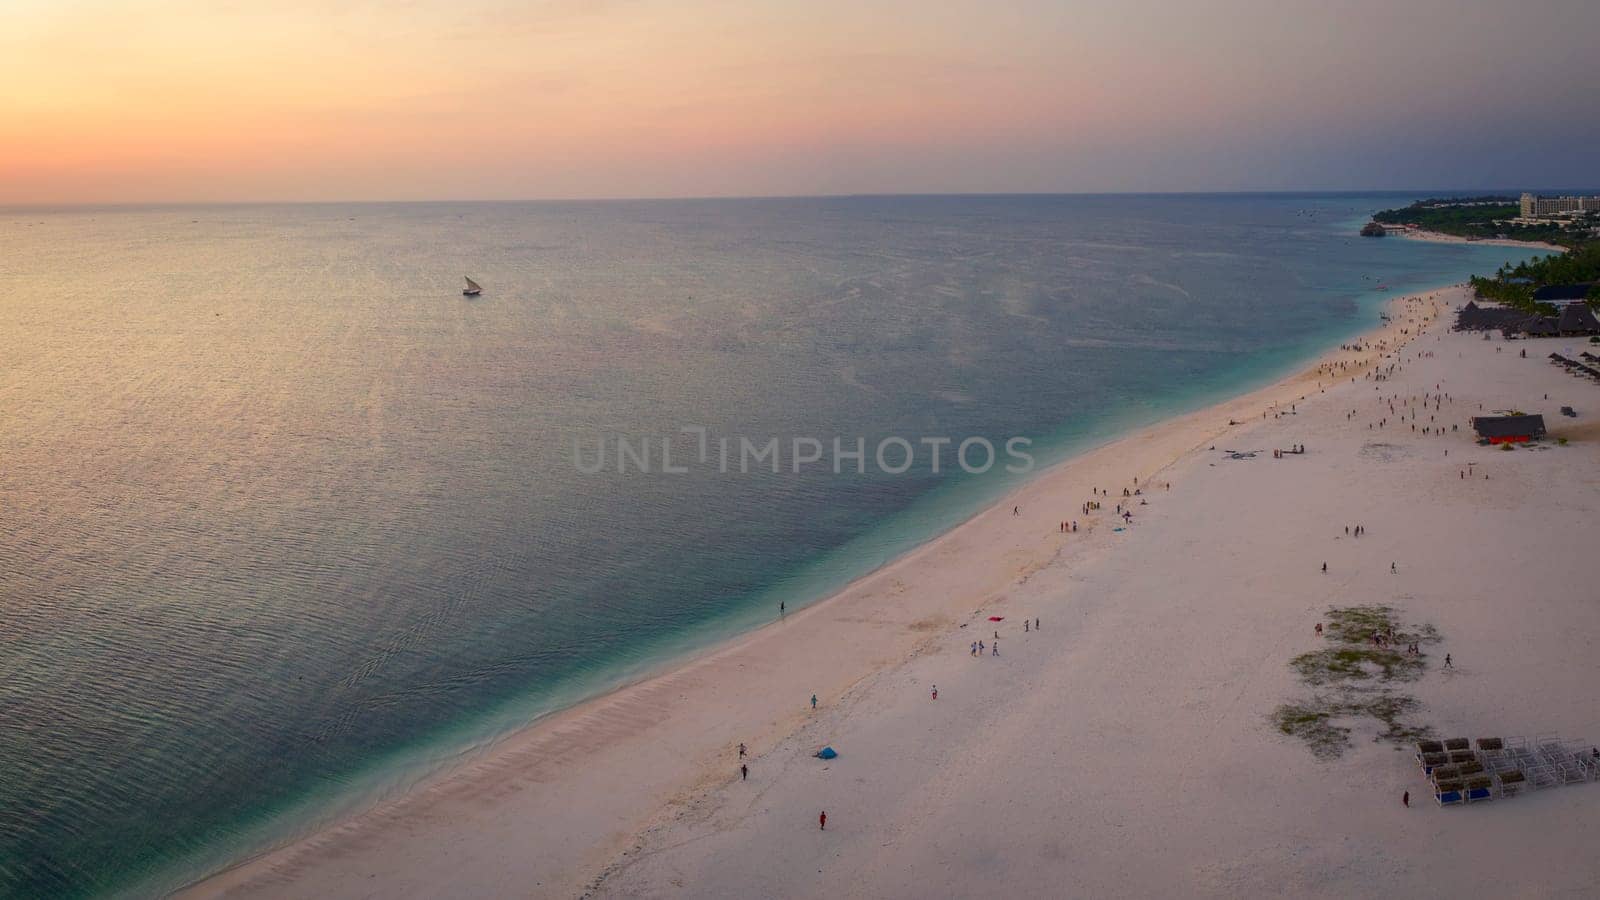 Zanzibar beach at sunset,where tourists and locals mix together of colors and joy, concept of summer vacation, aerial view of Kendwa beach, Tanzania